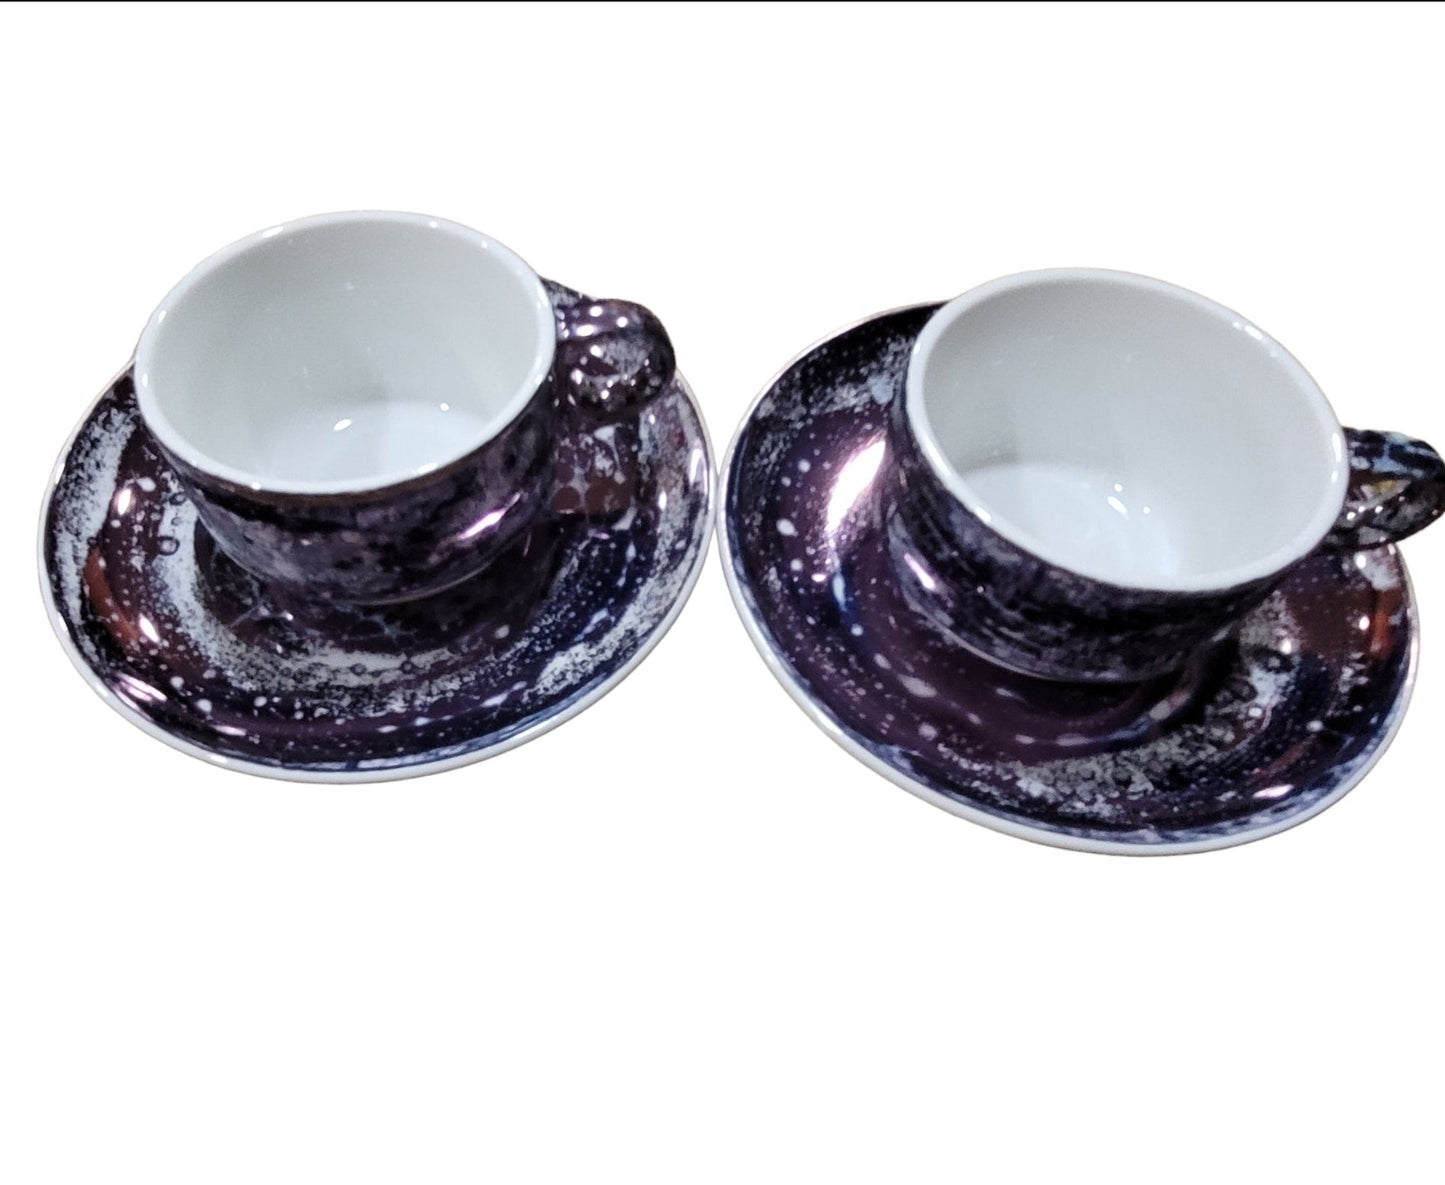 Cup and Saucer for 2 Luster design